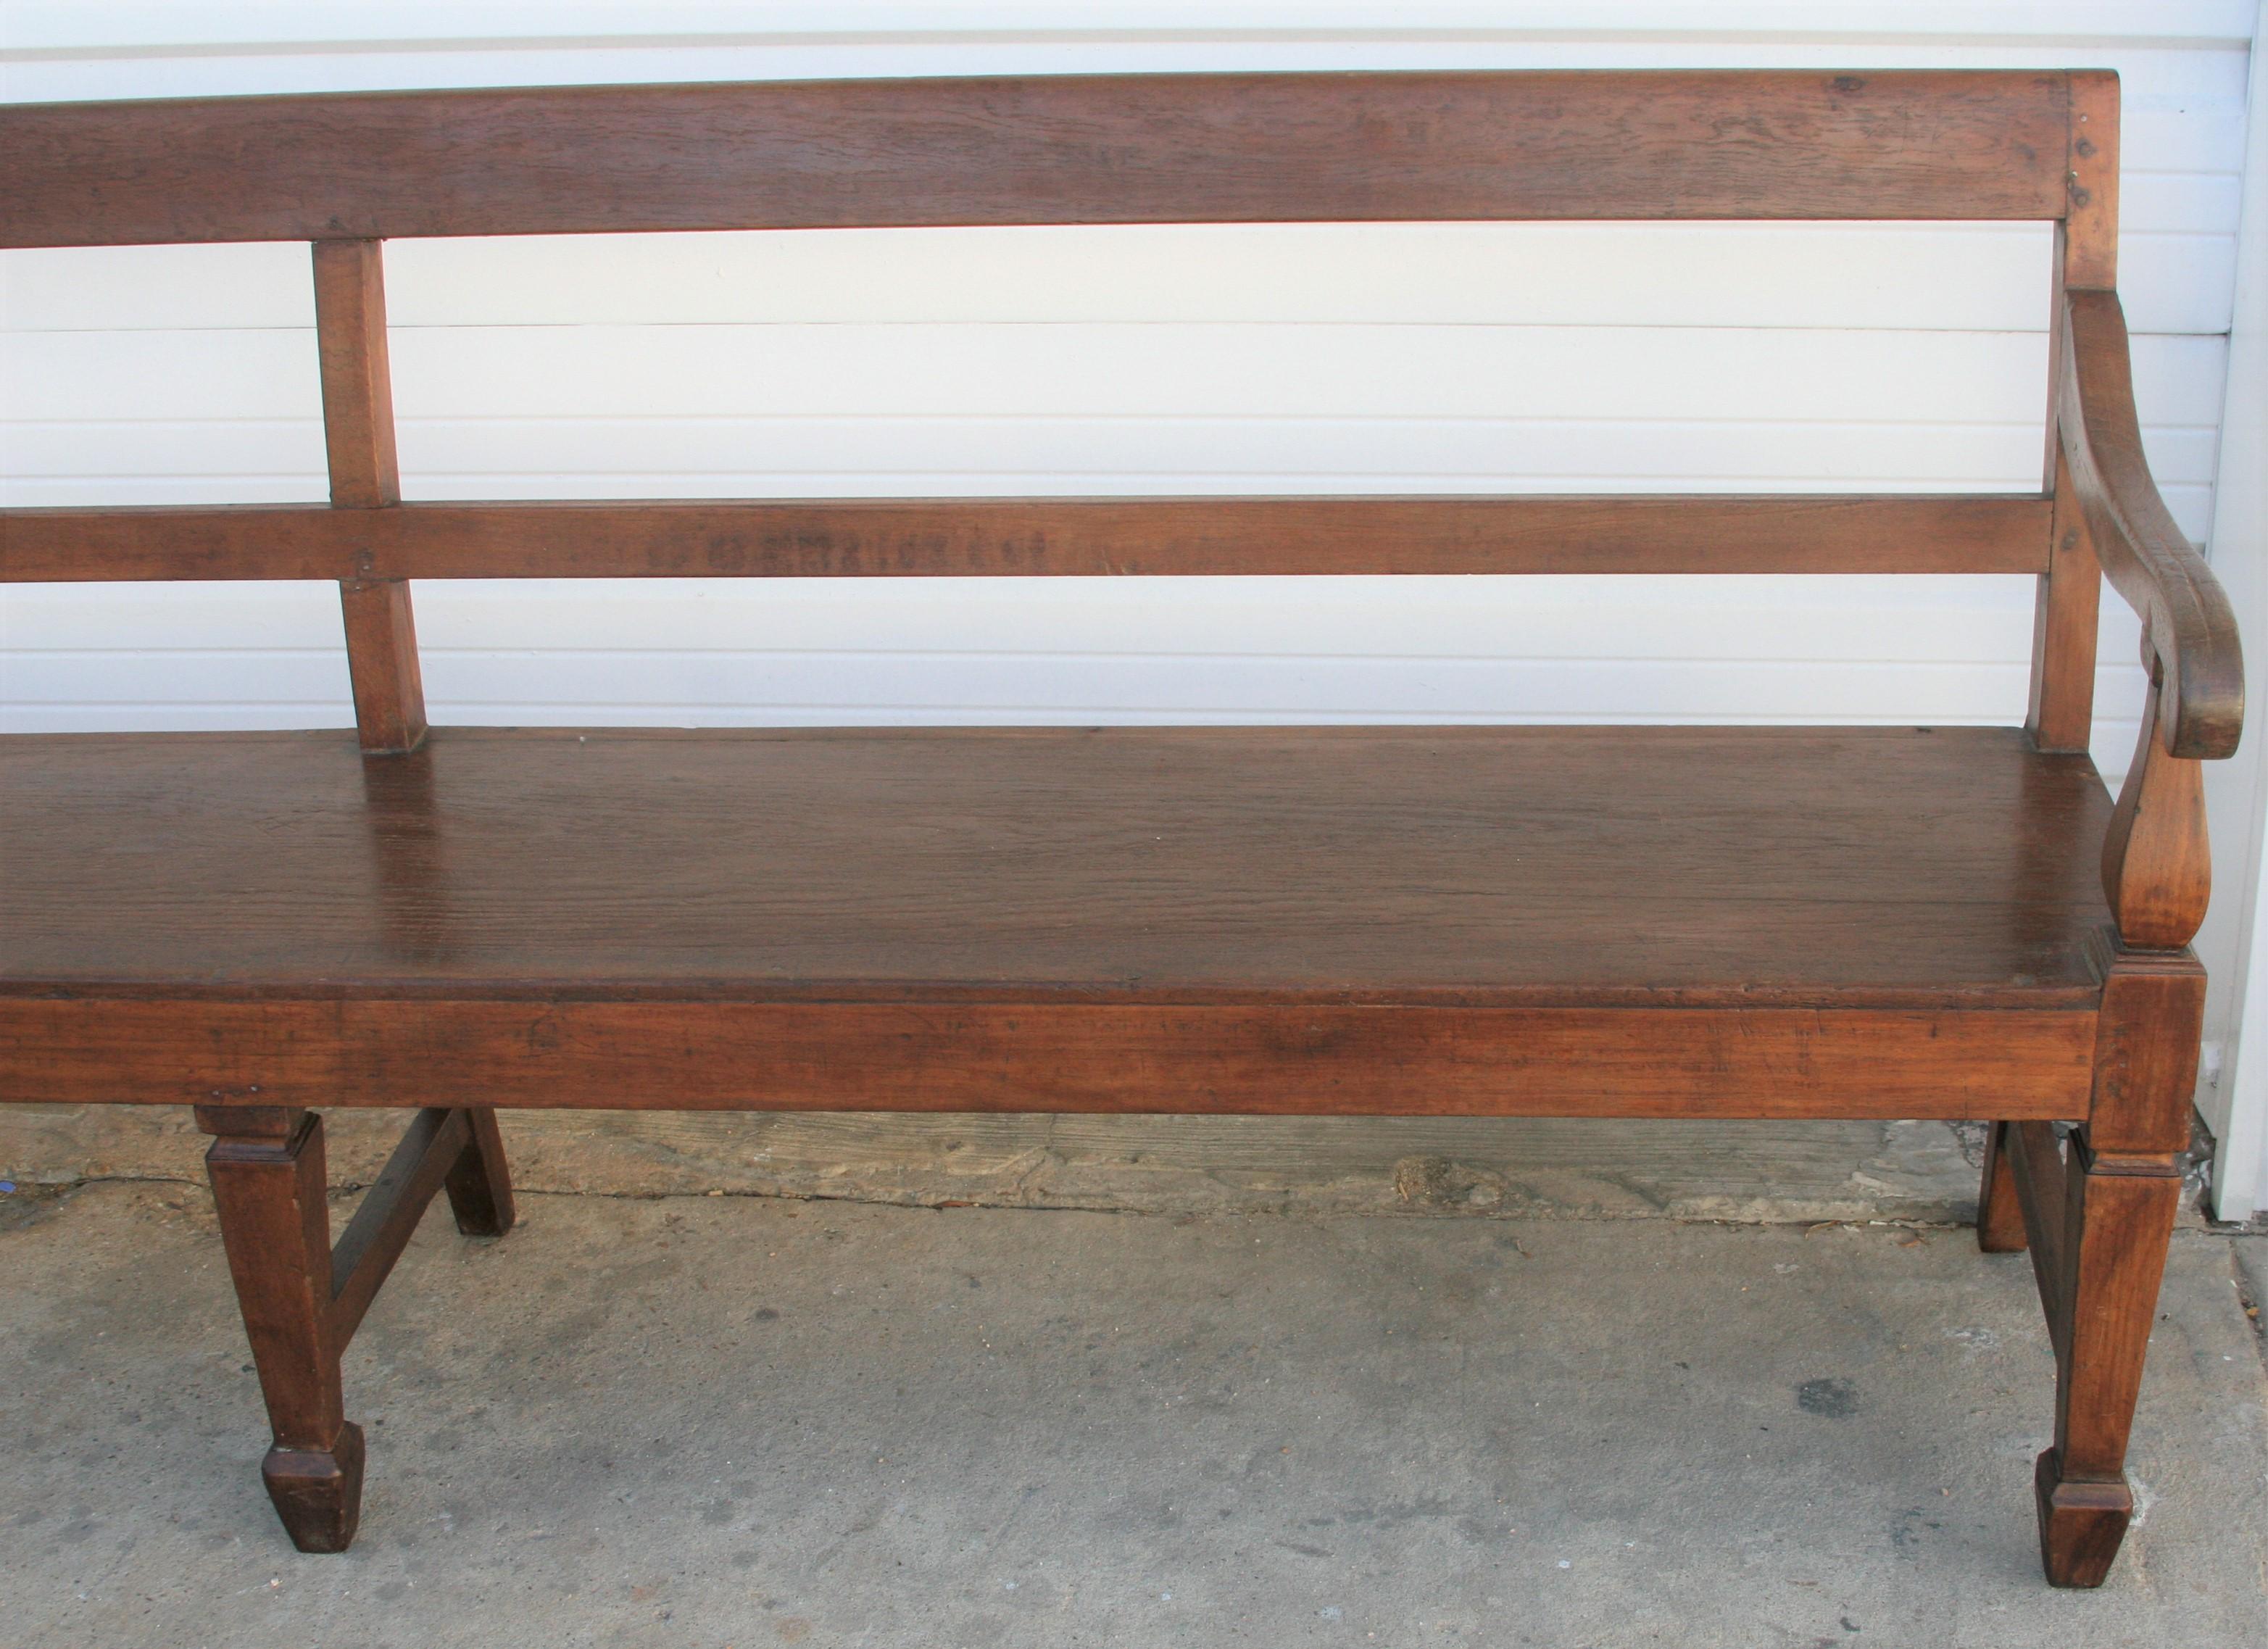 Anglo Raj Rare 1910s Solid Teak Wood Handcrafted Bench from a Company Office